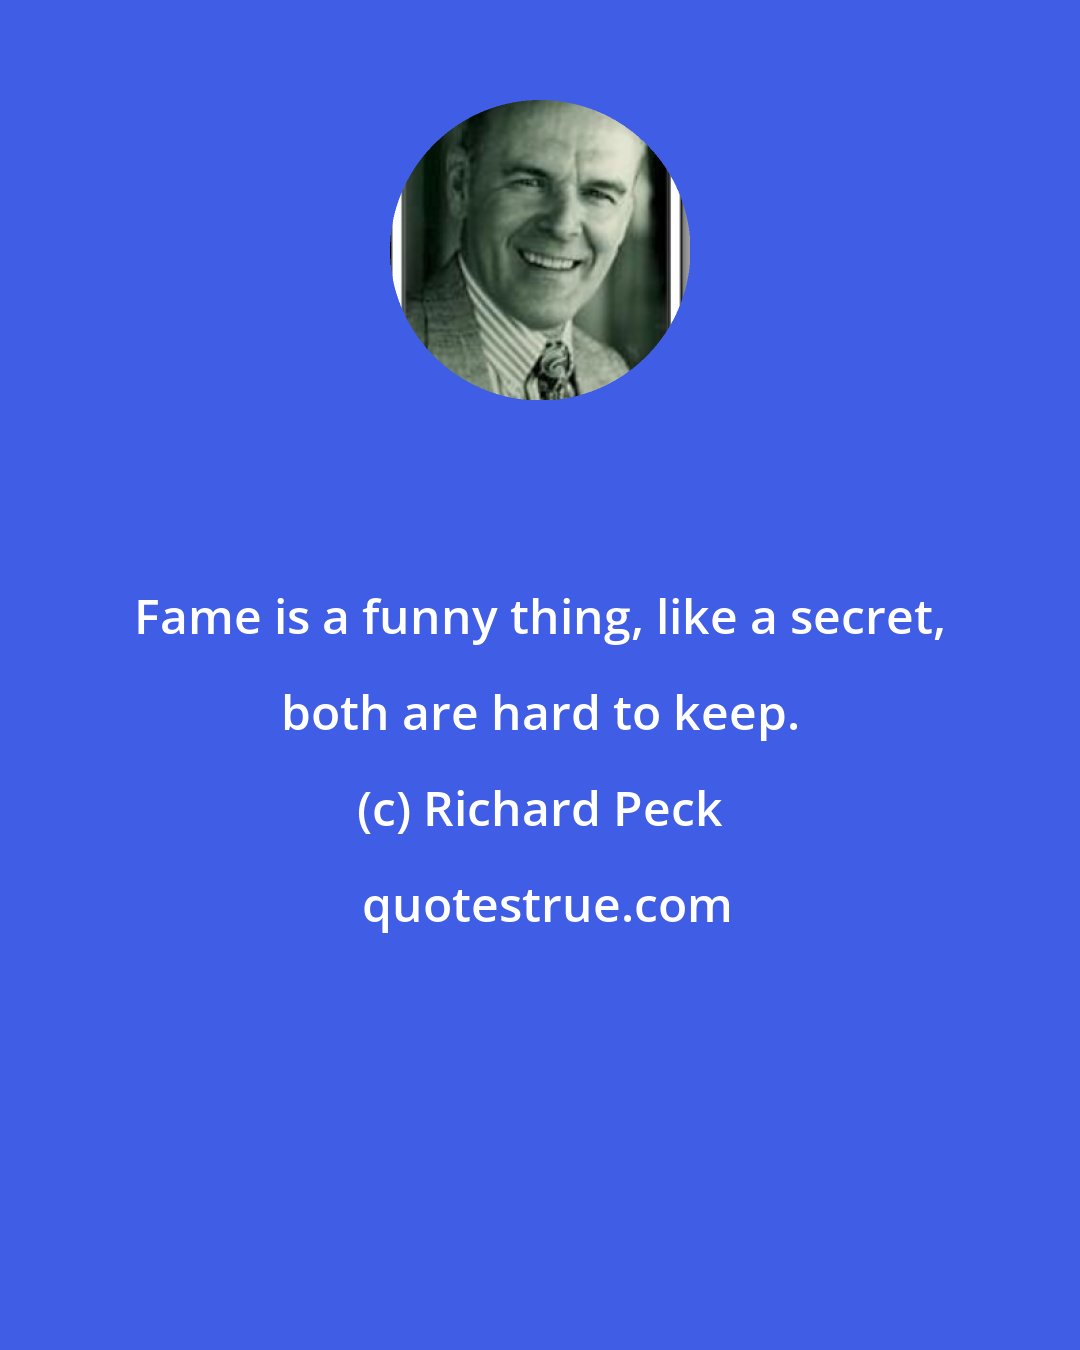 Richard Peck: Fame is a funny thing, like a secret, both are hard to keep.